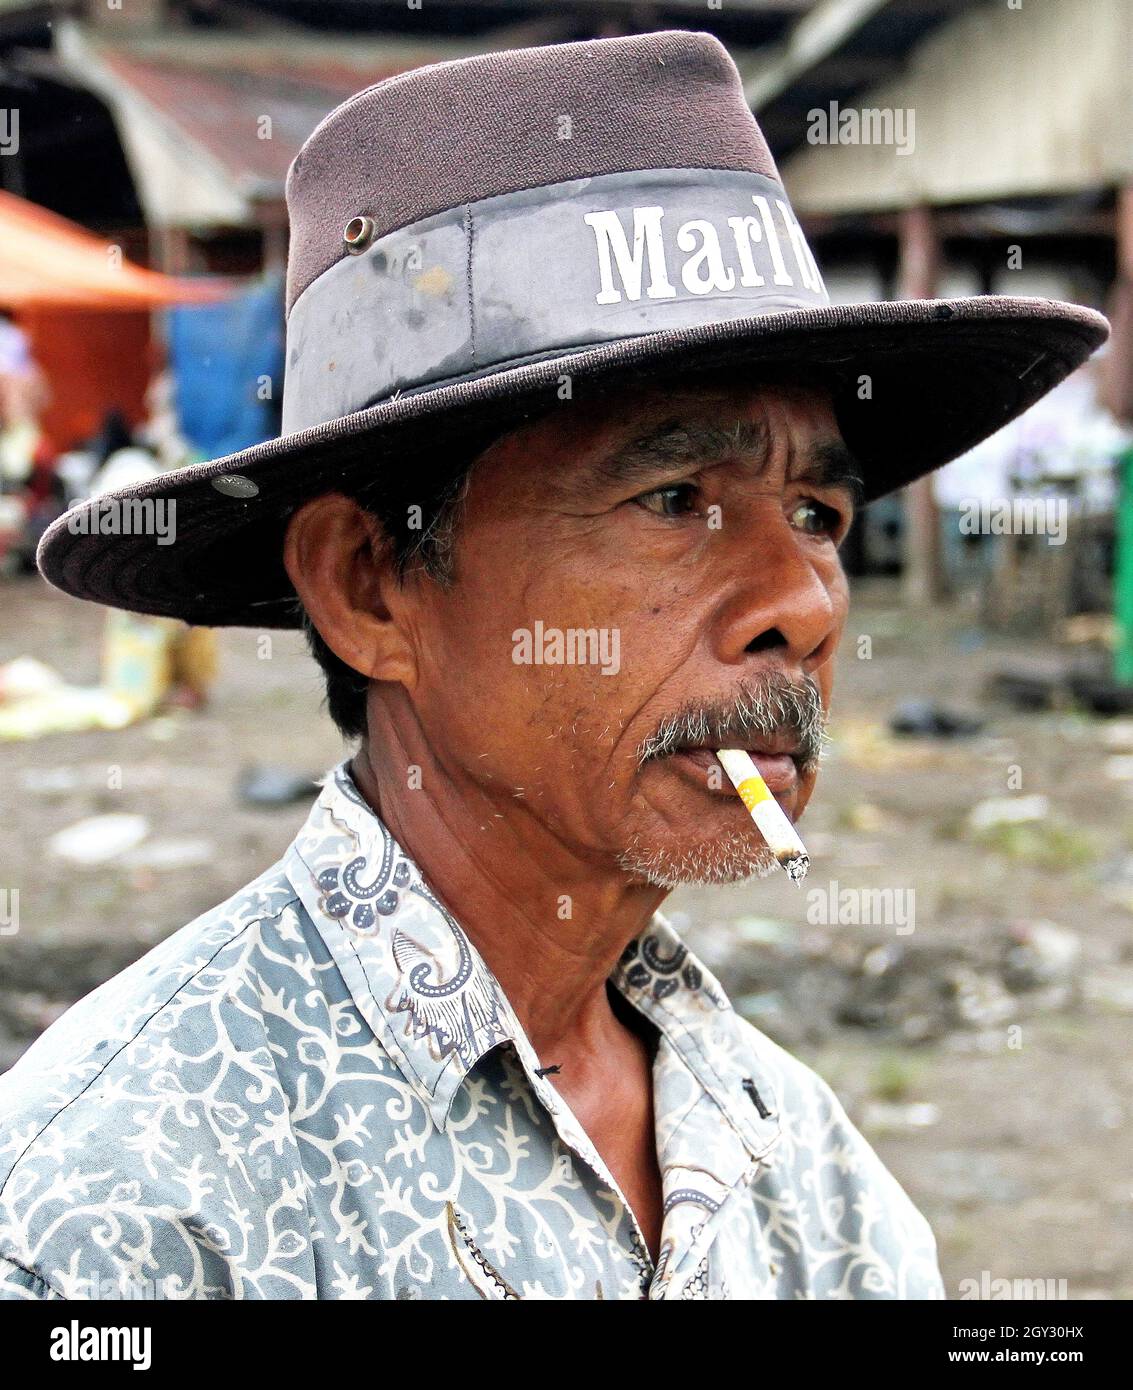 A Indonesian man wearing a Marlboro cowboy hat and smoking a cigarette. This was taken in an outdoor market in Bukittinggi, West Sumatra, Indonesia. Stock Photo